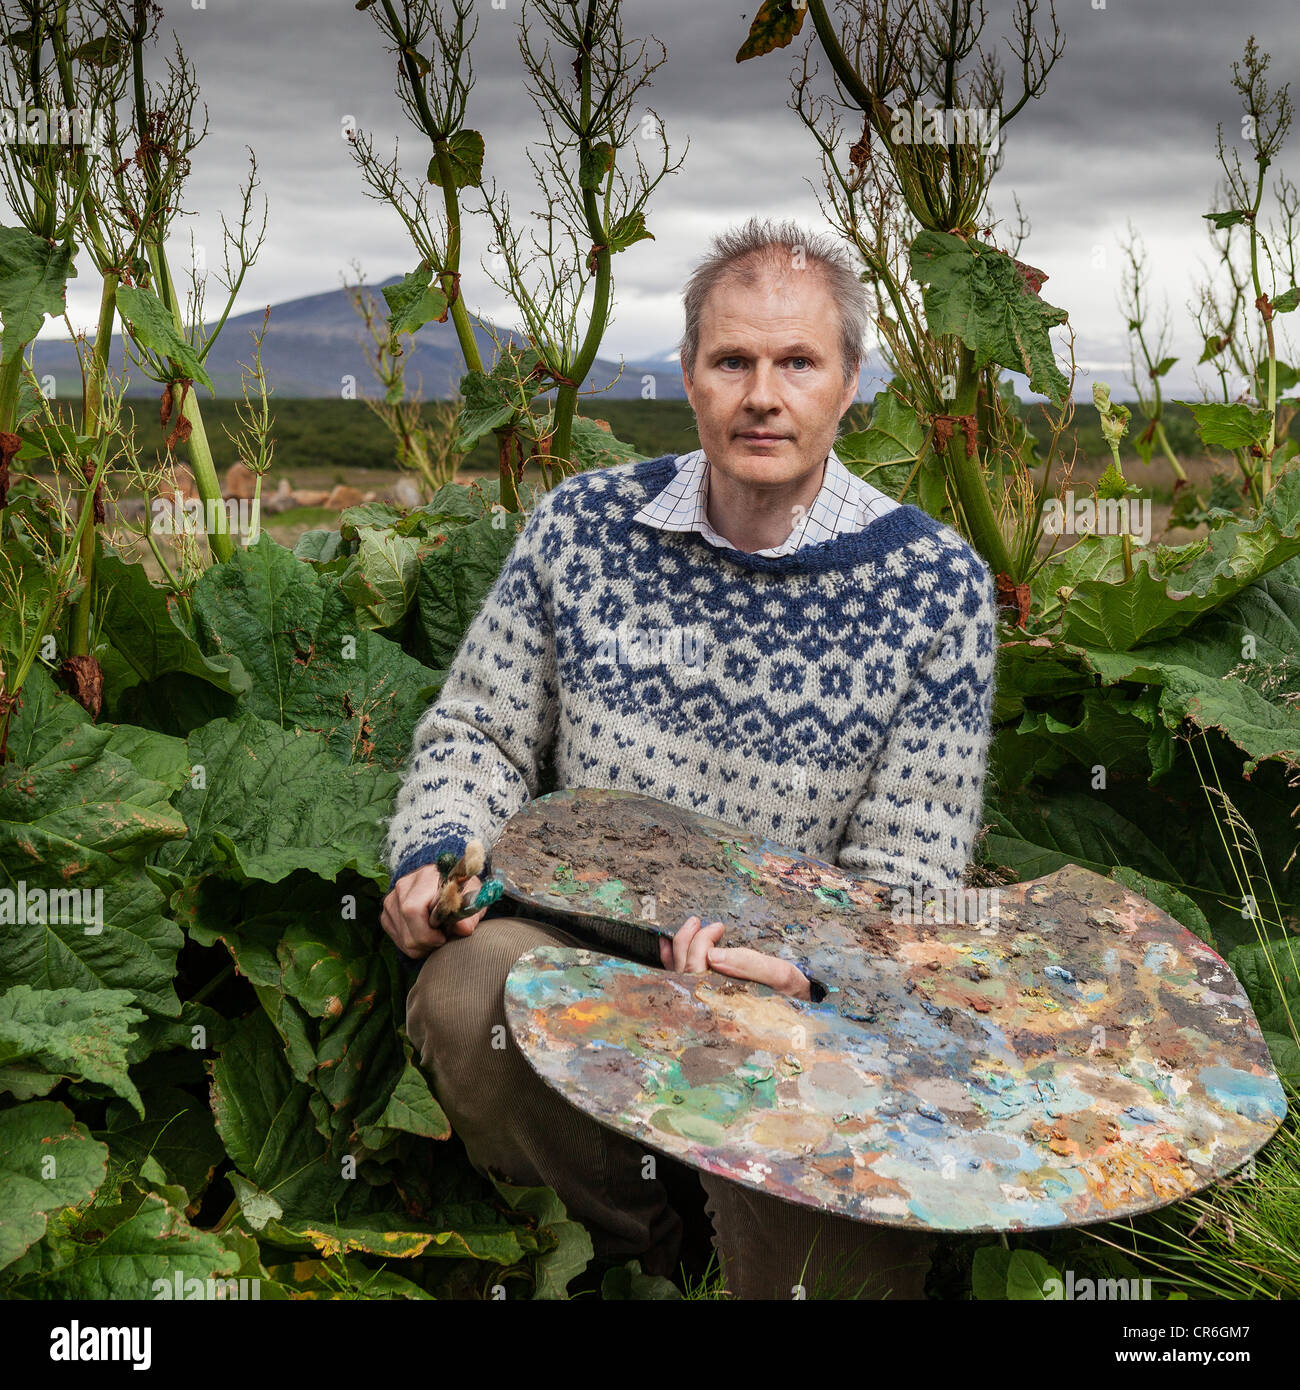 Artist with palette surrounded by rhubarb plants, Borgarfjordur Iceland Stock Photo